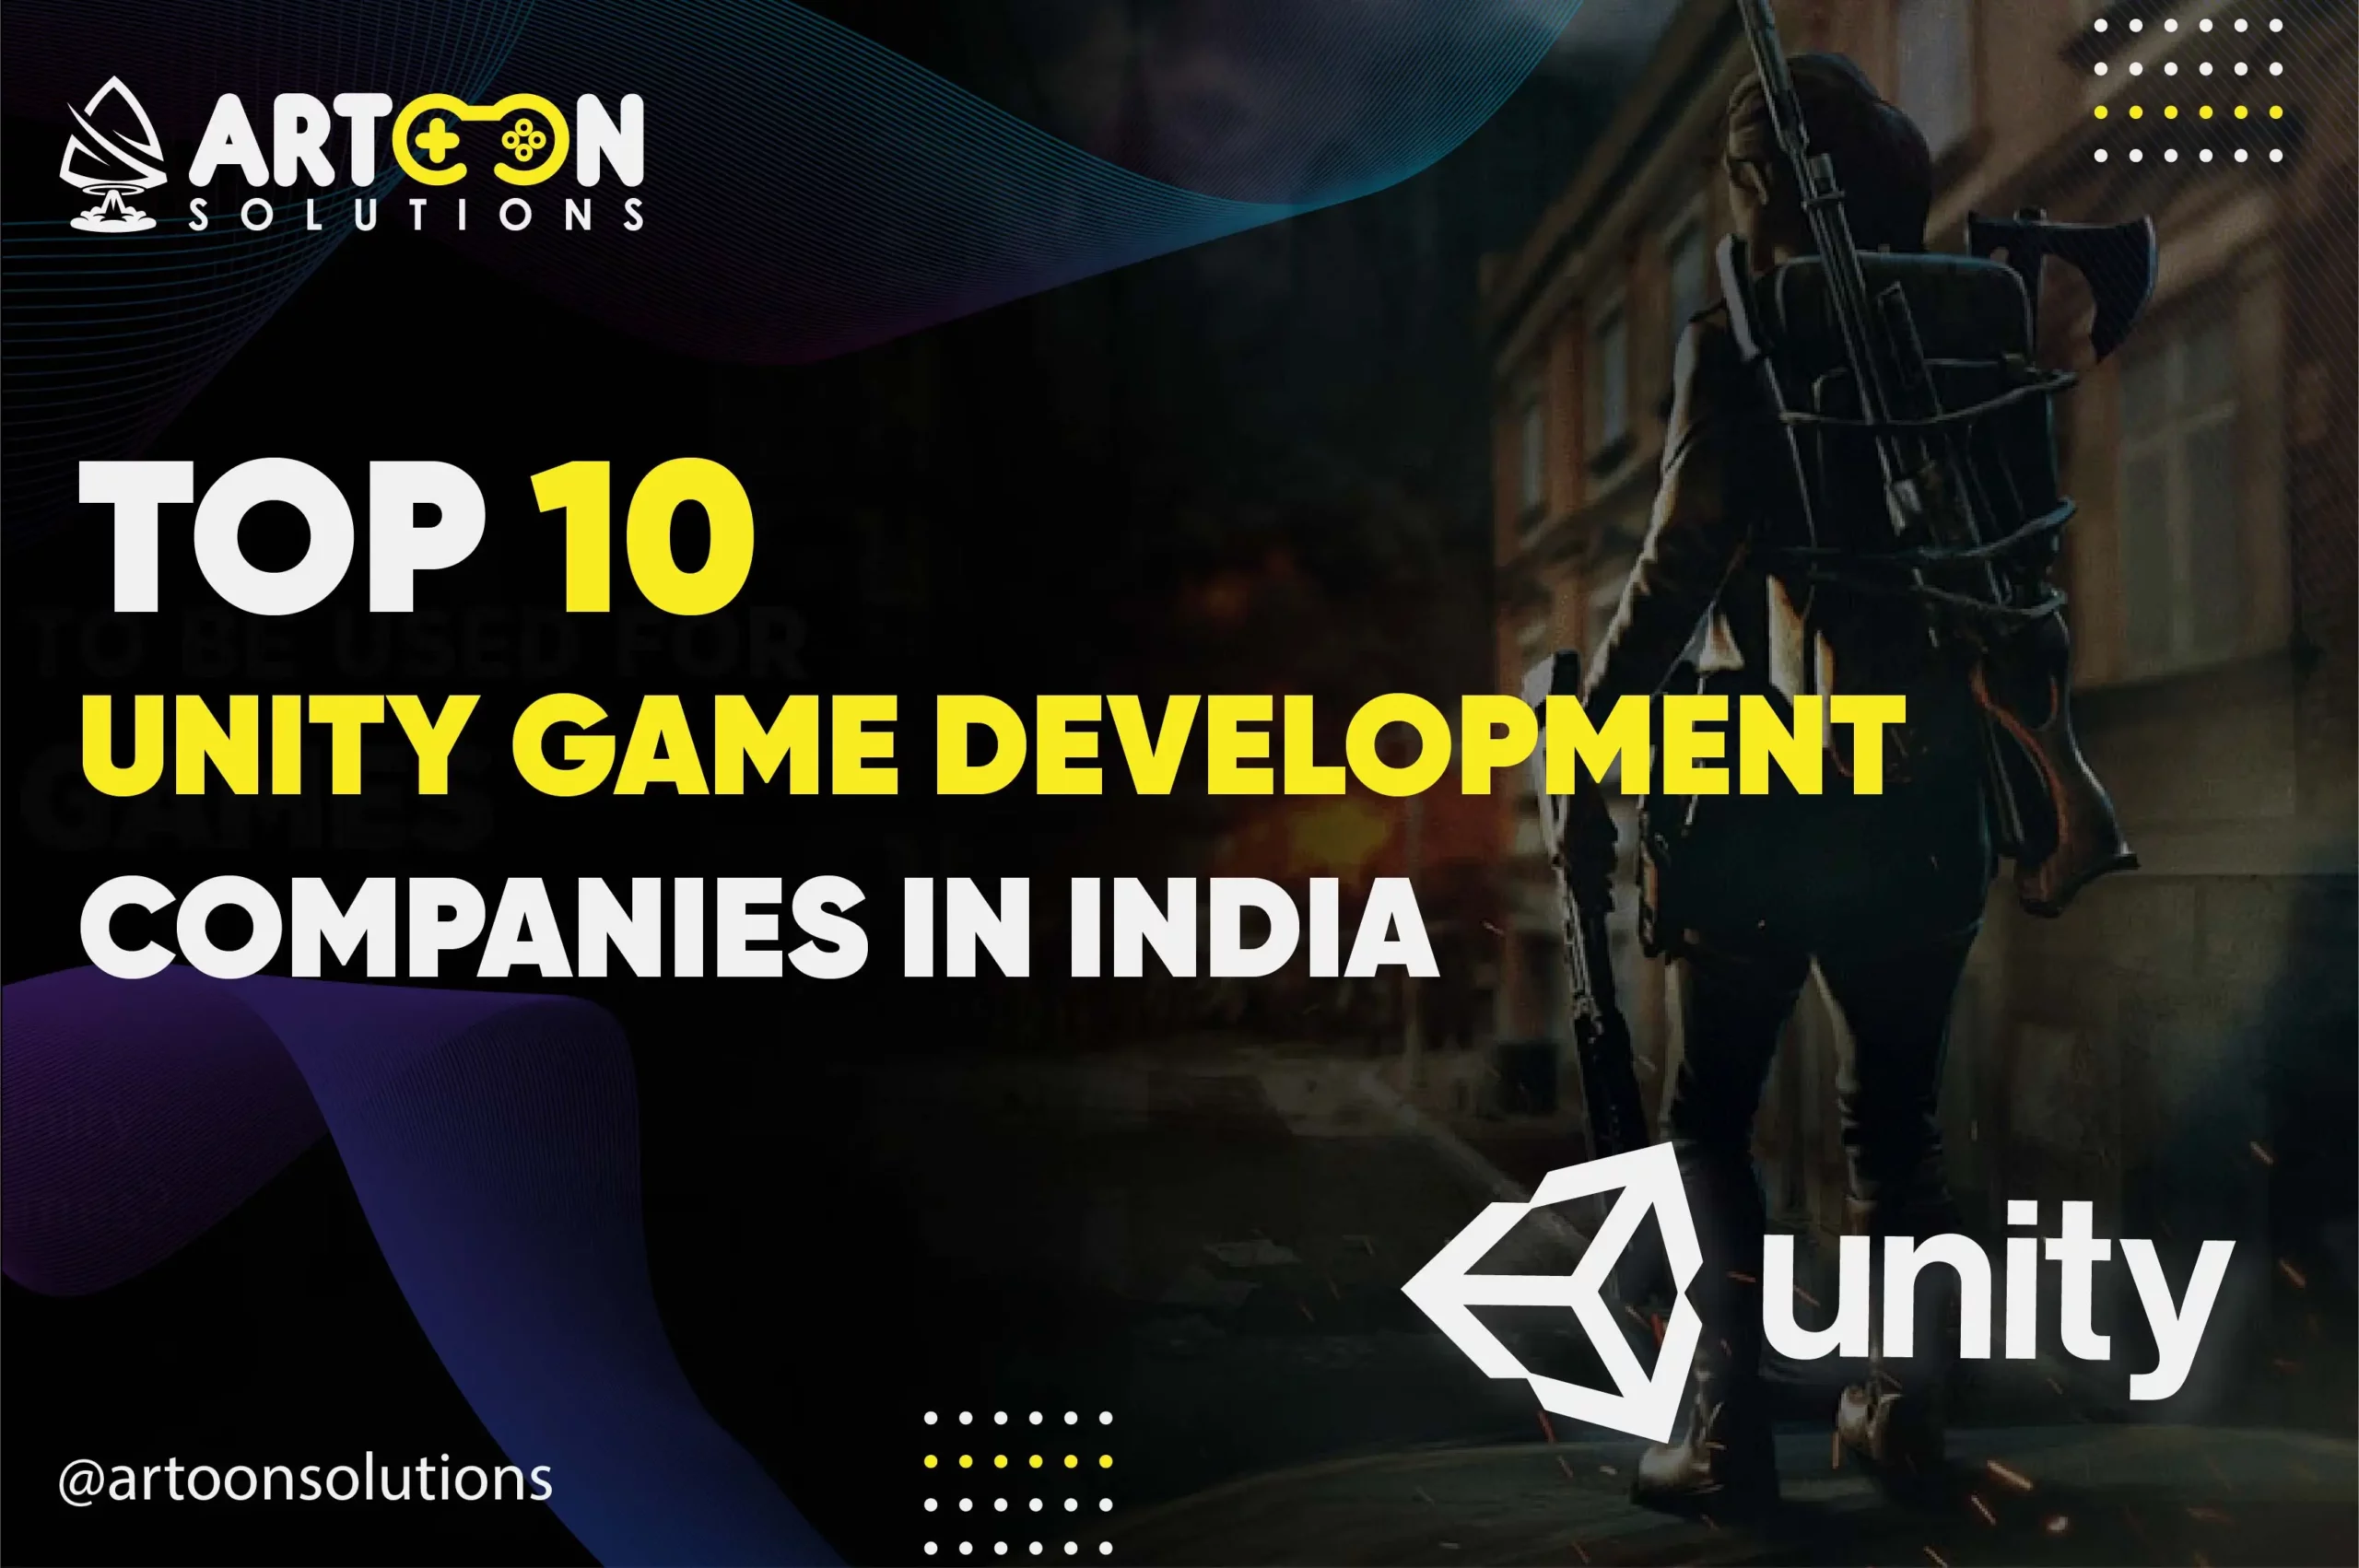 The Top 10 Unity Game Development Companies in India